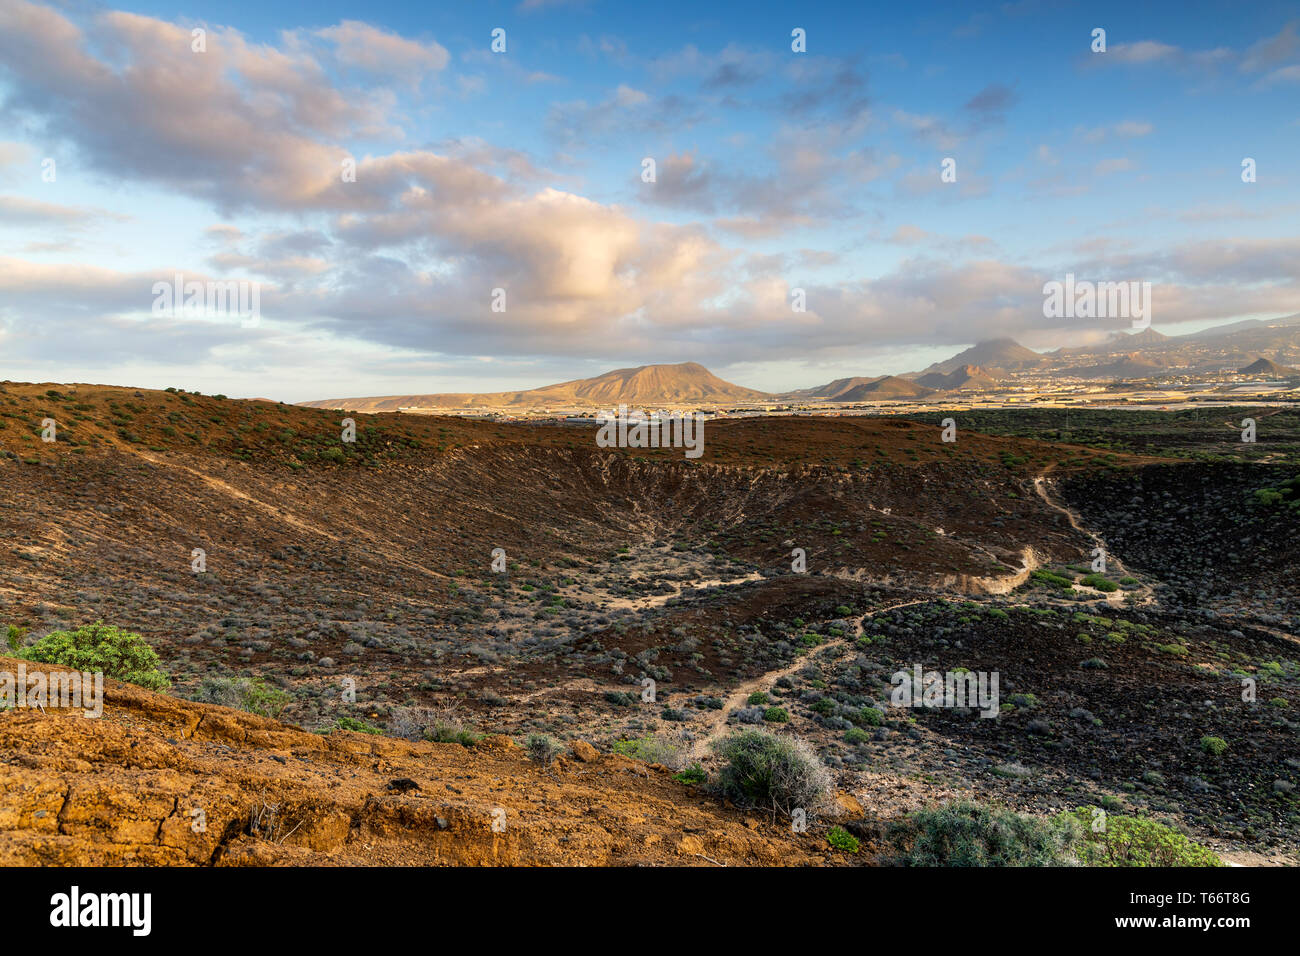 Crater of Montana Amarilla, yellow mountain at dawn, Tenerife, Canary Islands, Spain Stock Photo